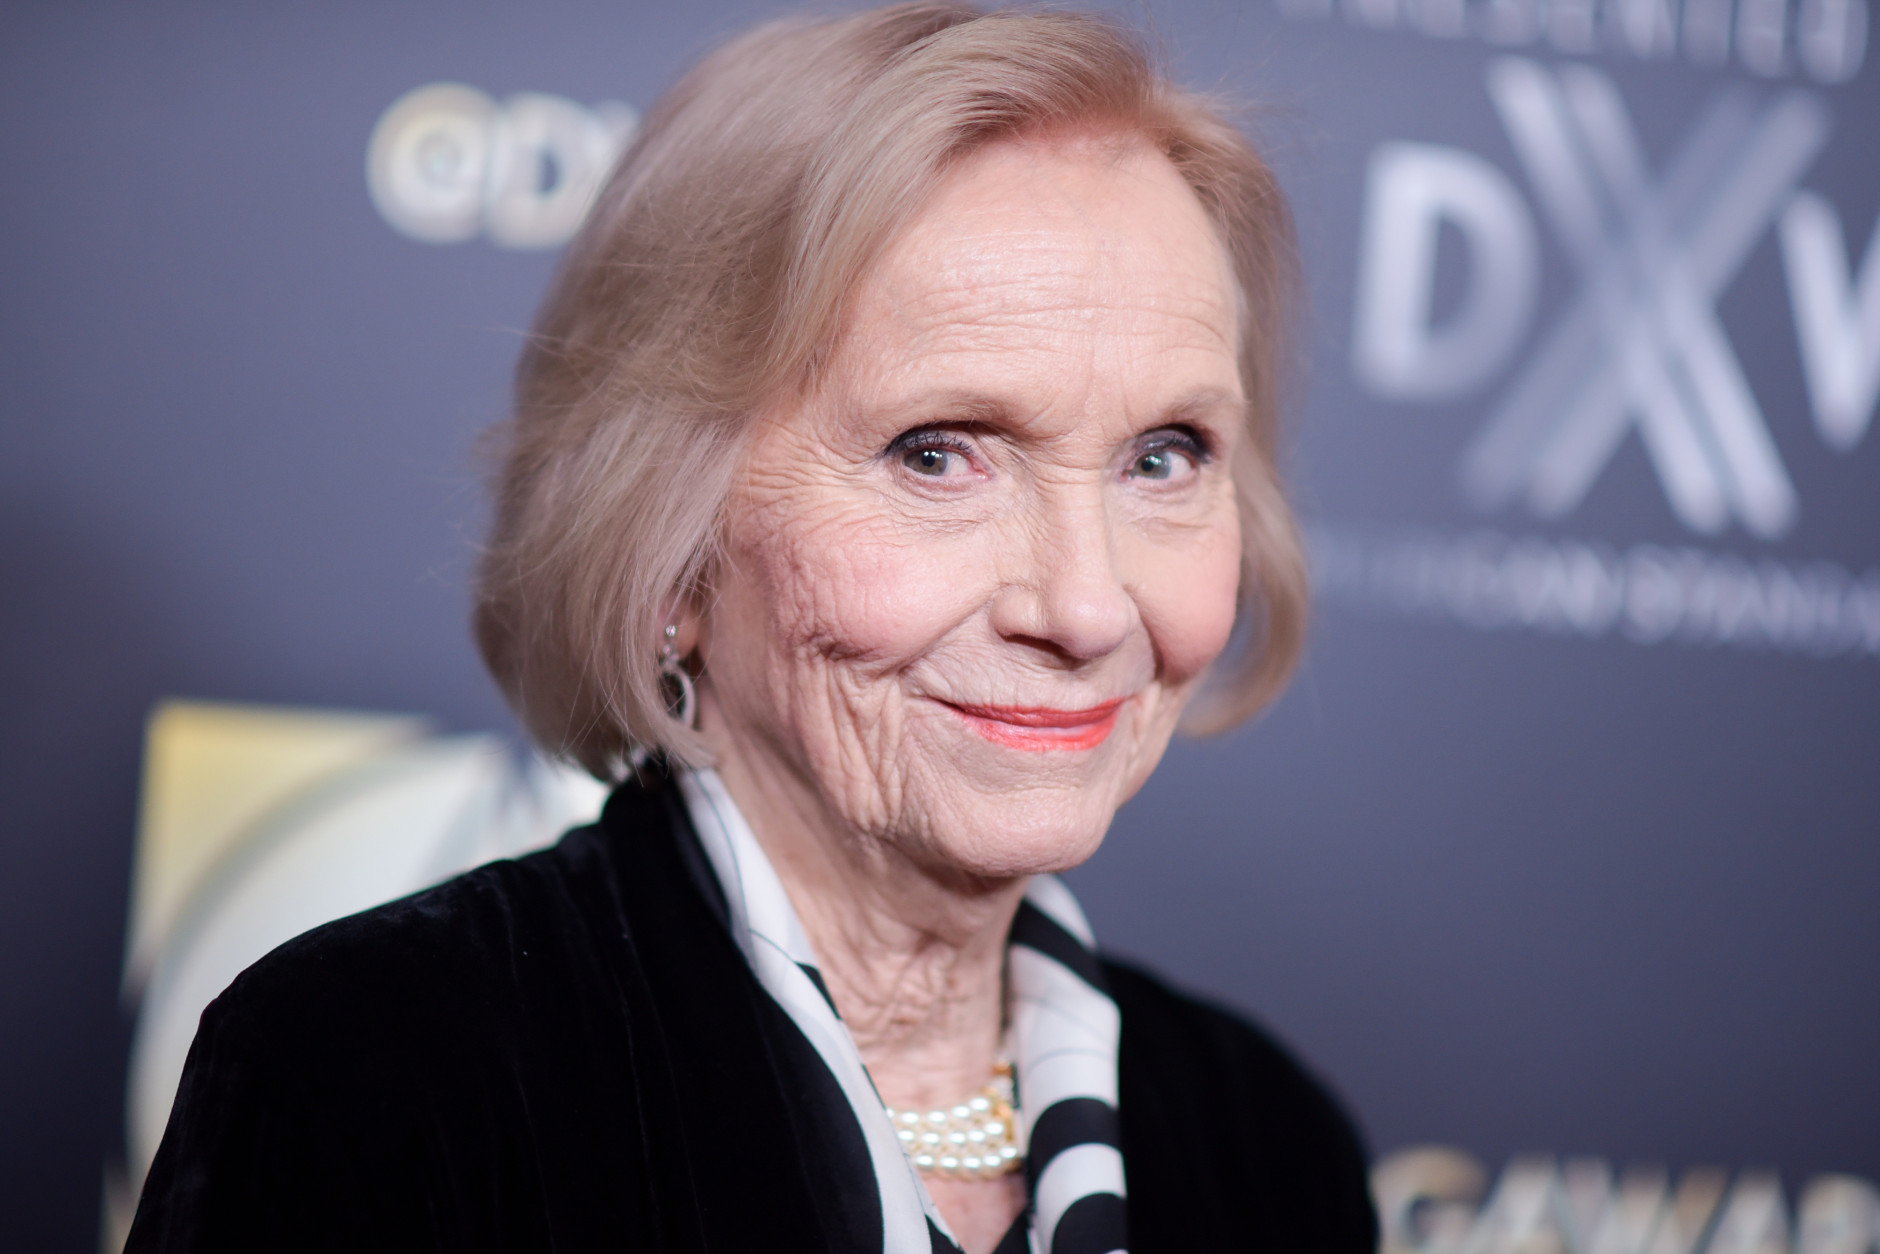 Actress Eva Marie Saint attends the 20th Annual Art Directors Guild Excellence In Production Design Awards held at the Beverly Hilton Hotel on Sunday, Jan. 31, 2016, in Beverly Hills, Calif. (Photo by Richard Shotwell/Invision/AP)